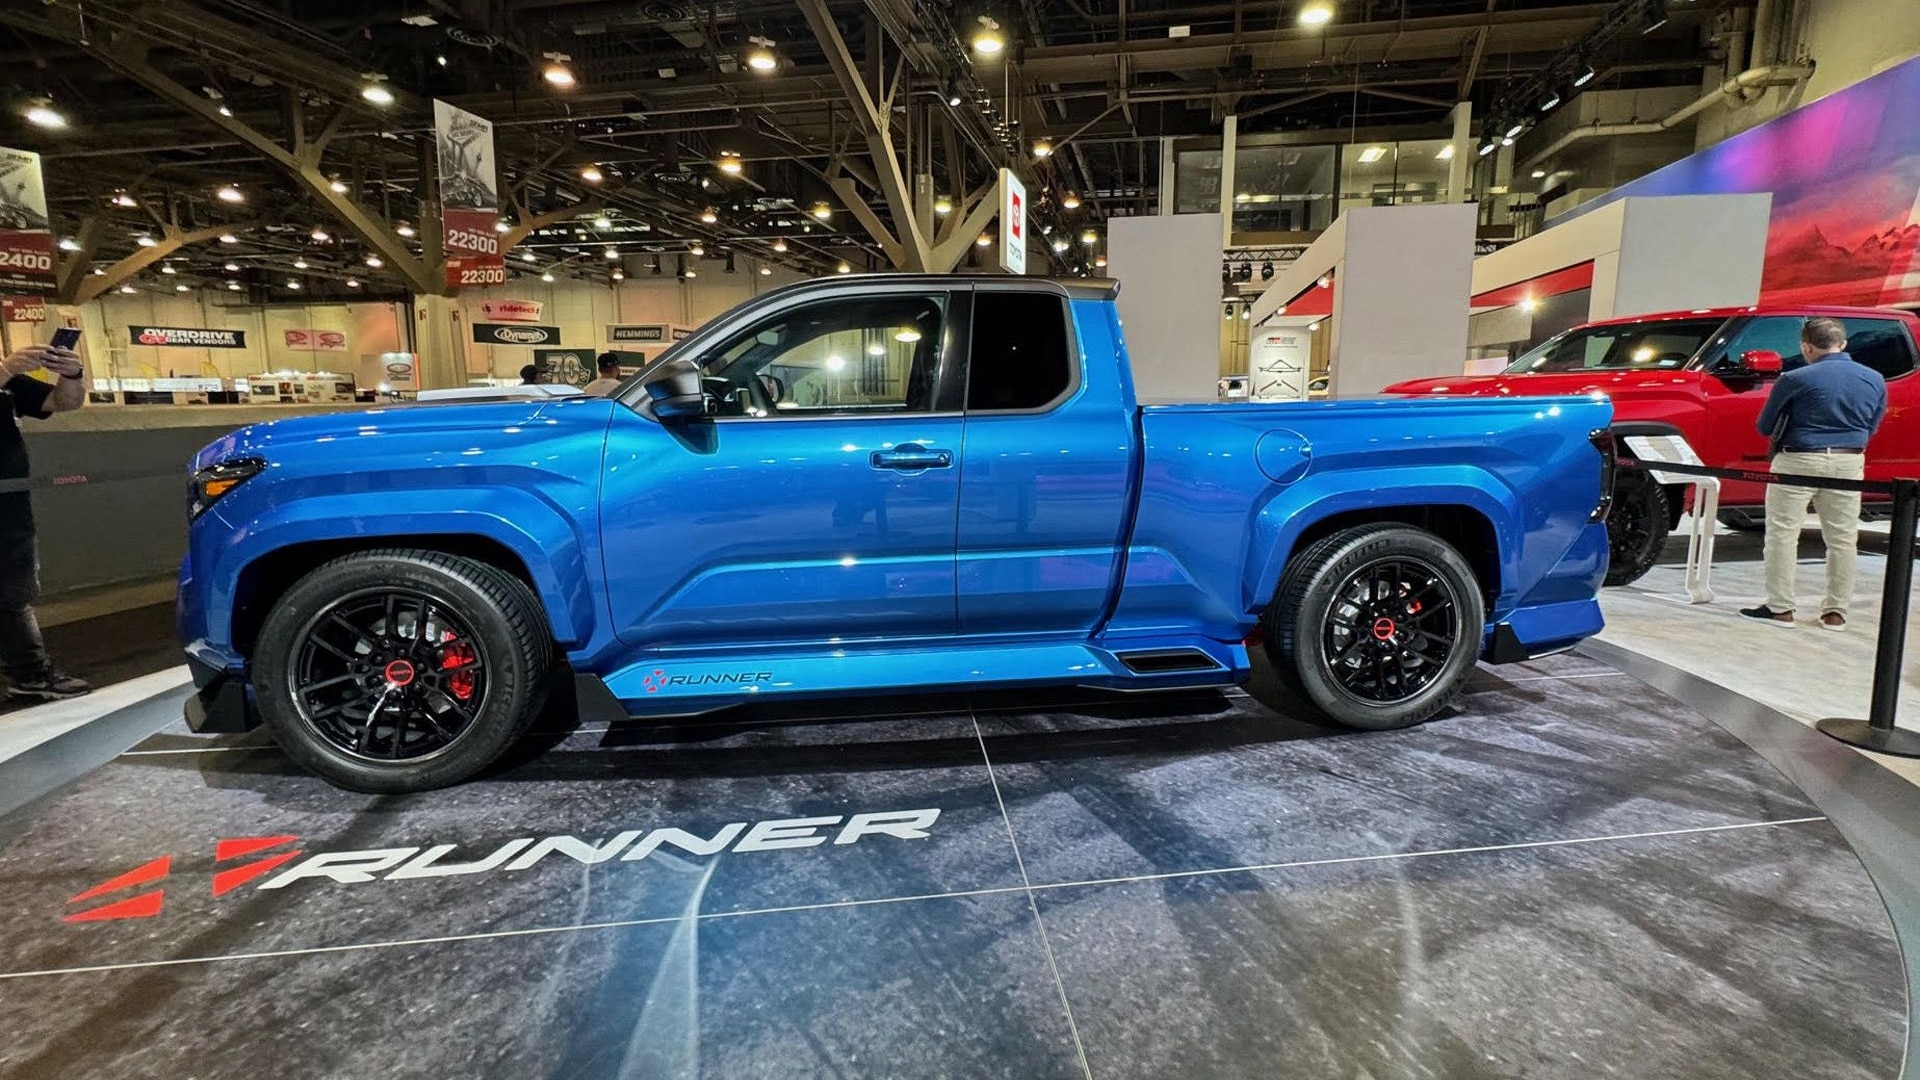 Toyota Tacoma X-Runner concept